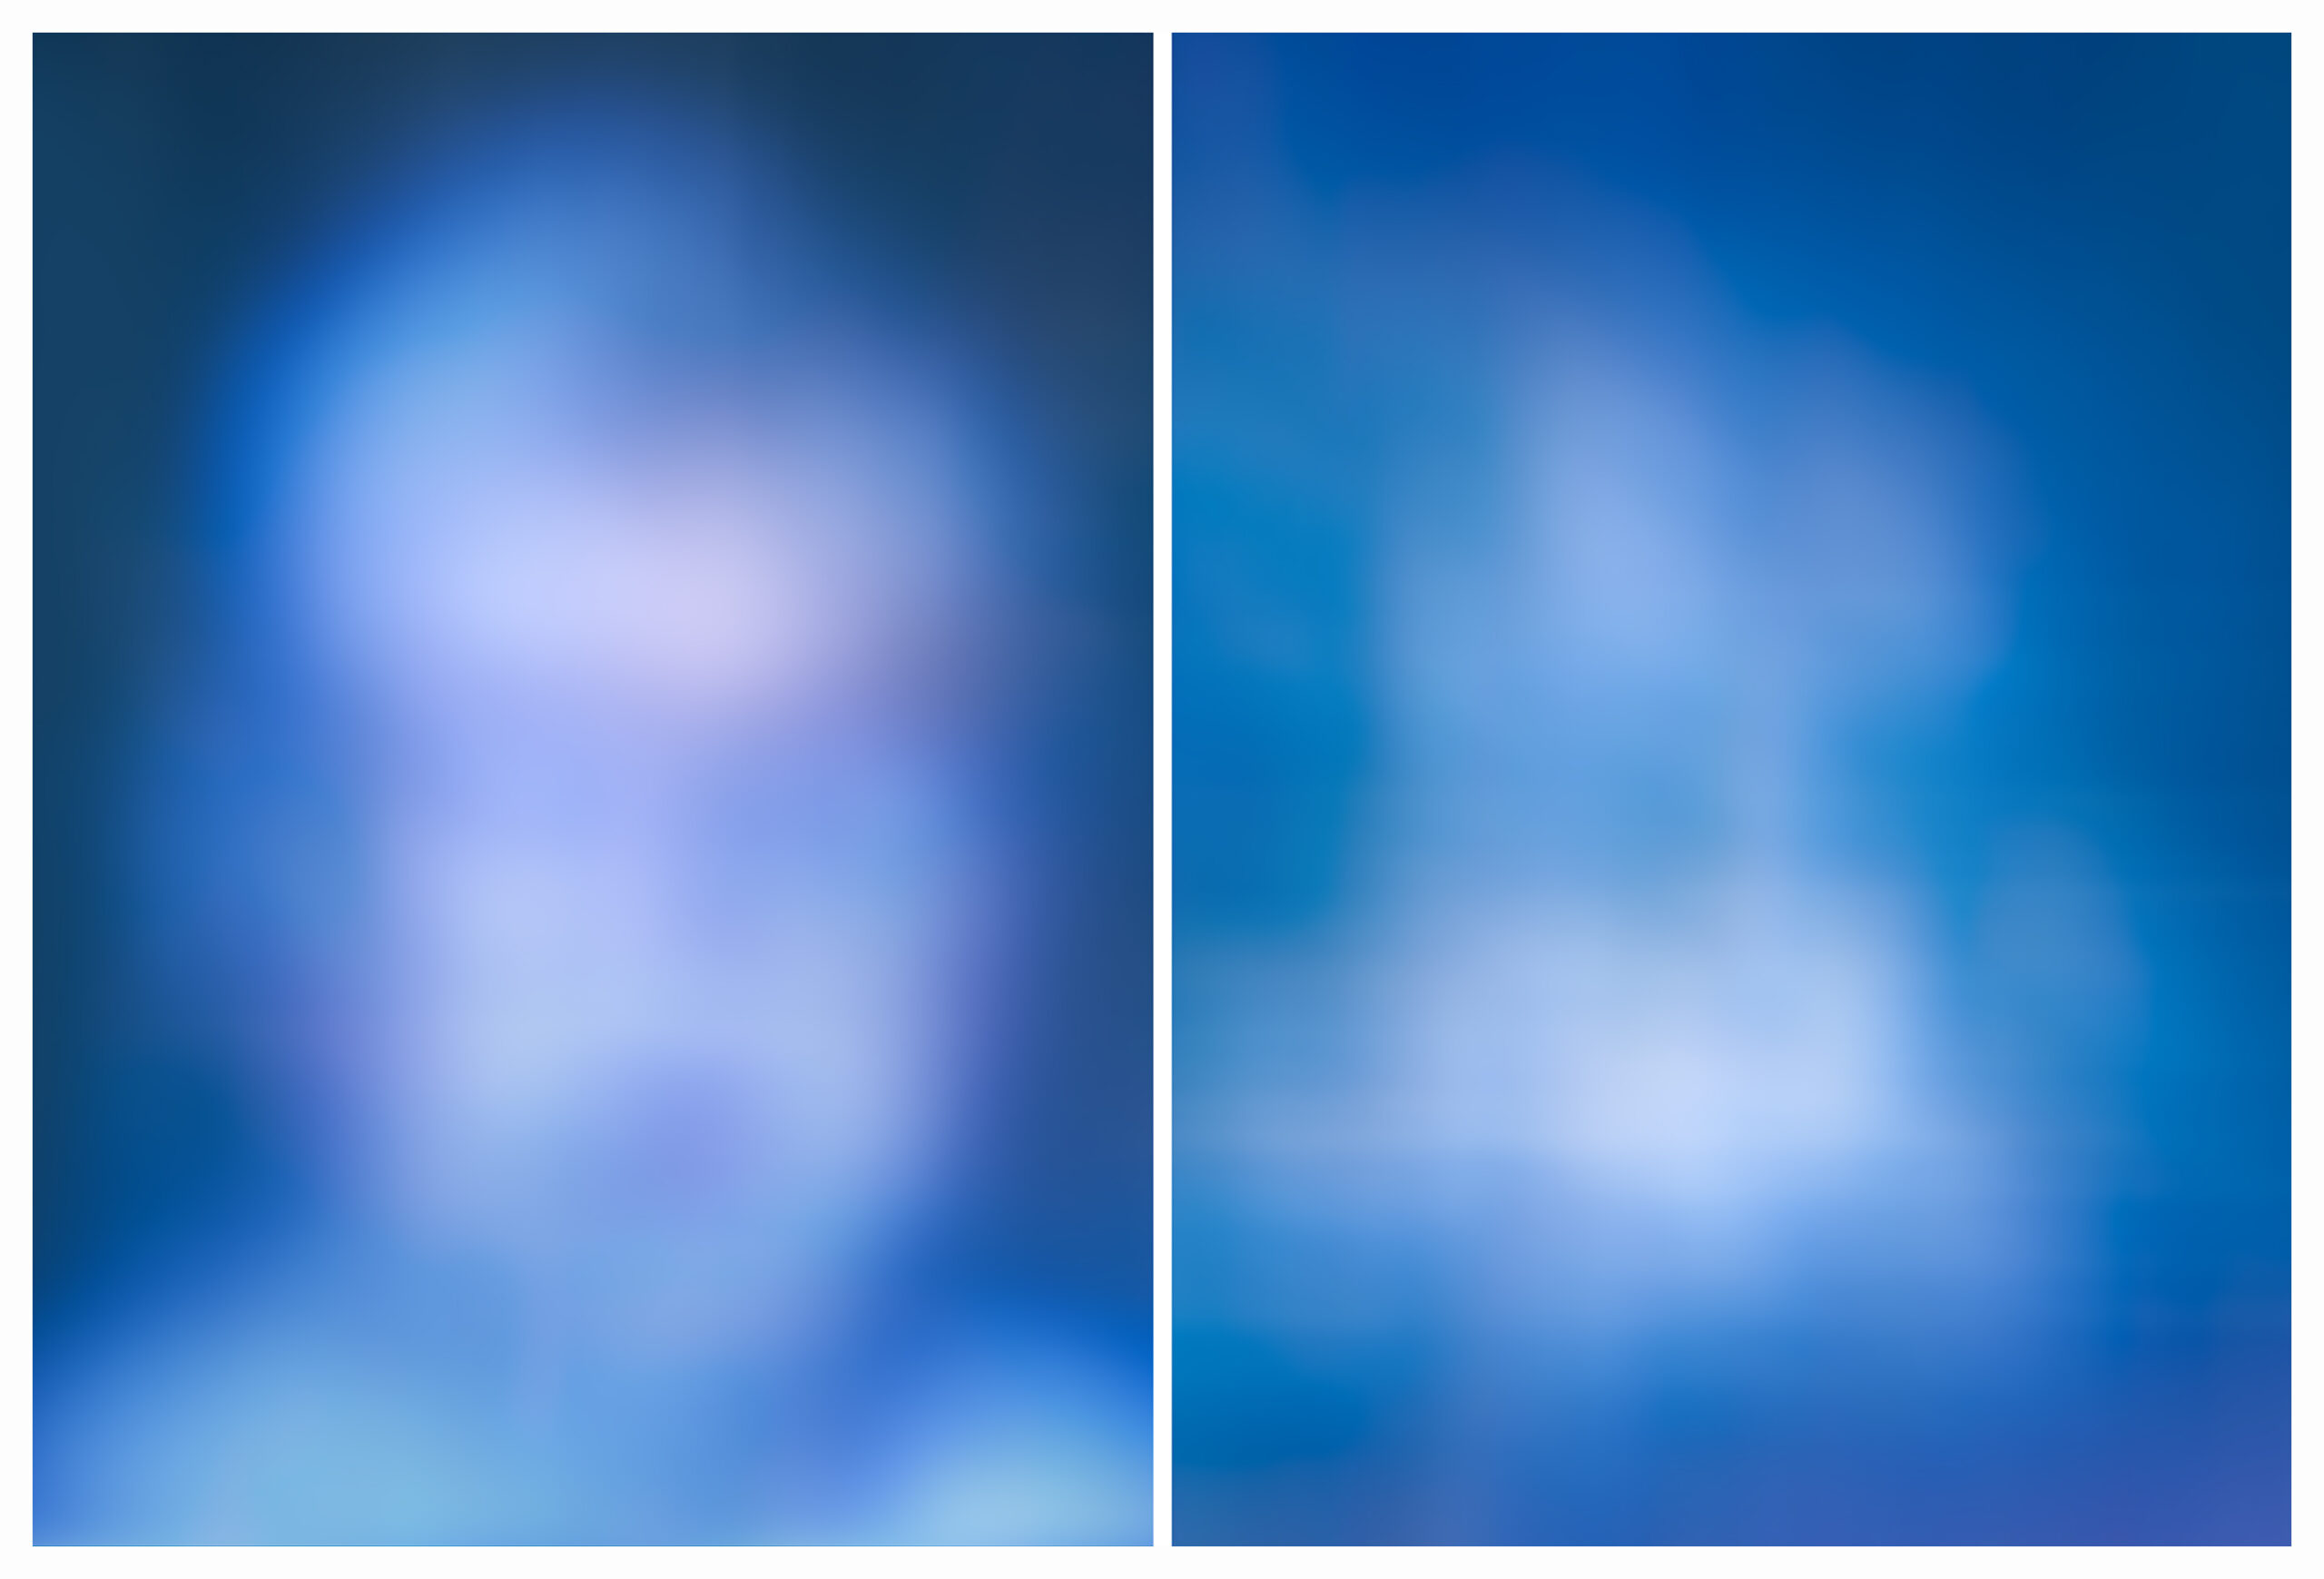 Blurry abstract photo diptych of blueish white human head portrait facing snow in clouds